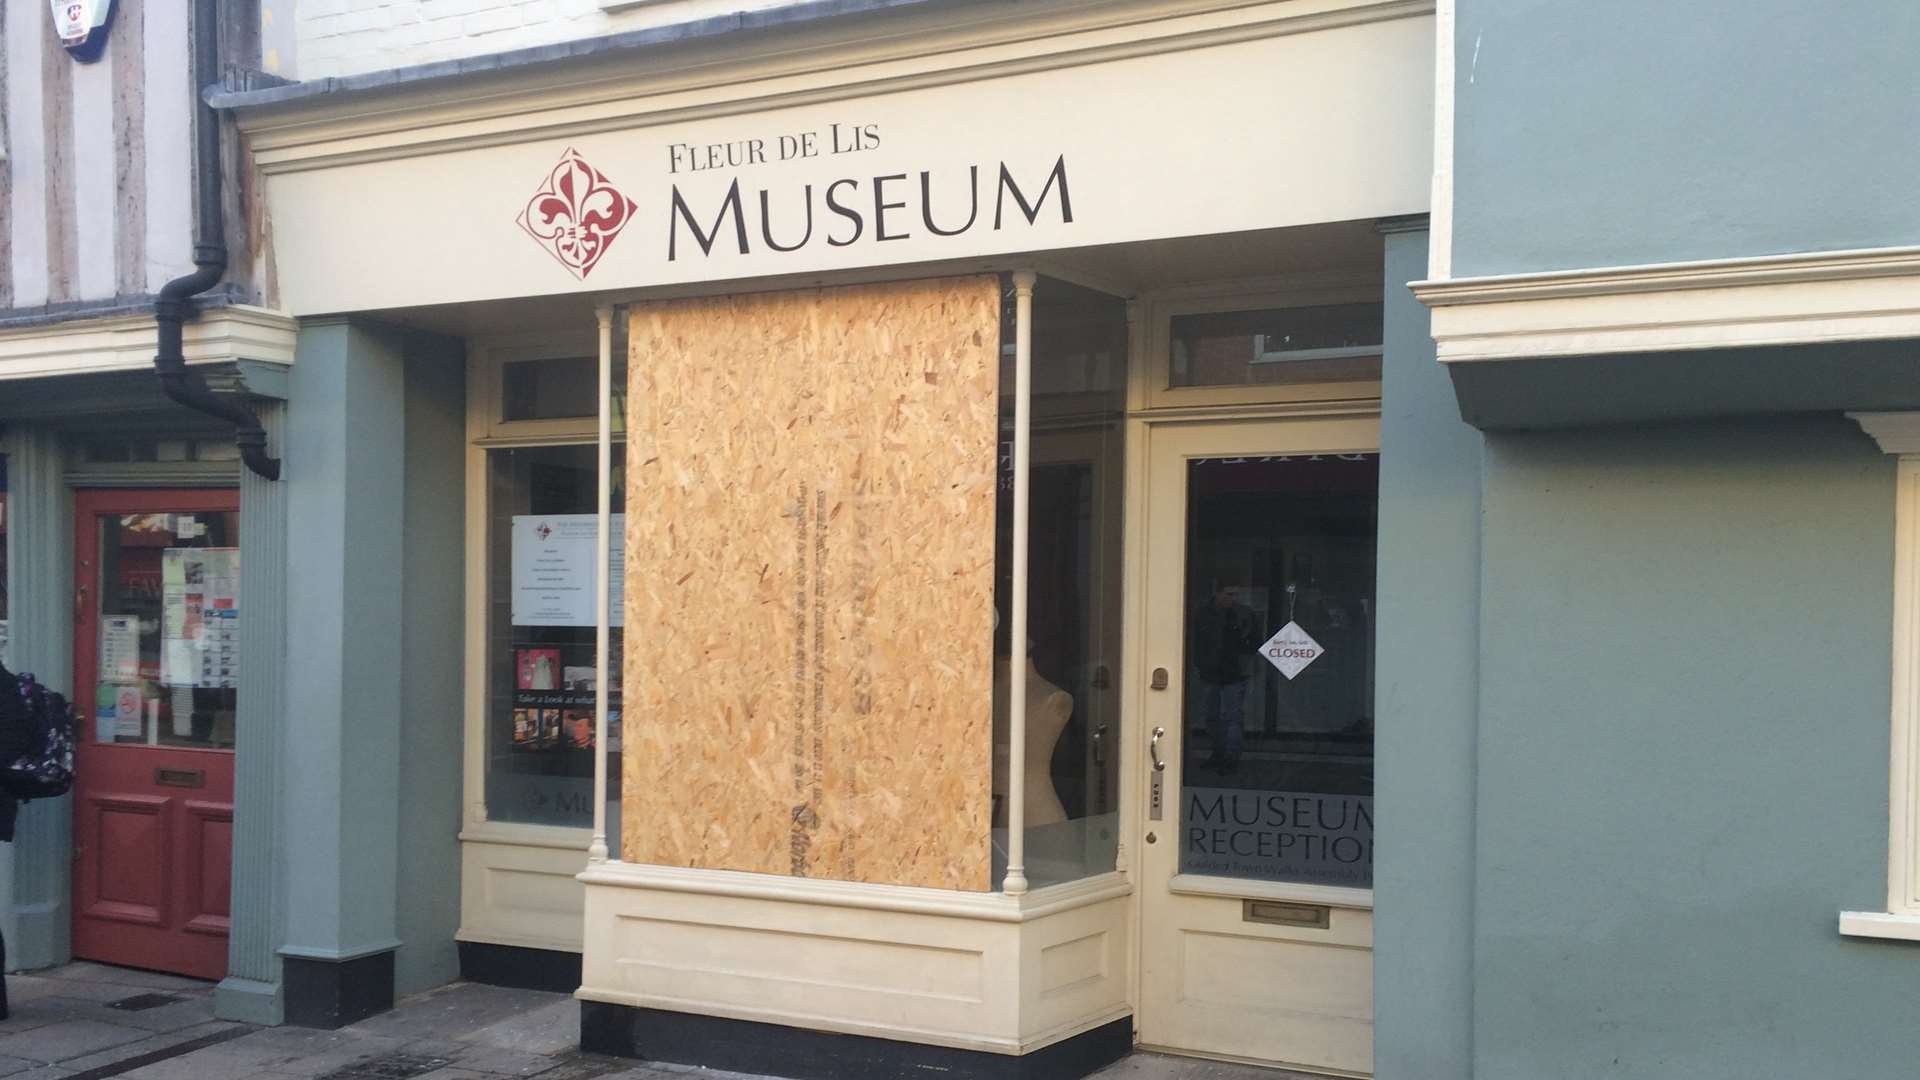 The Fleur de Lis museum was one of the buildings targeted.